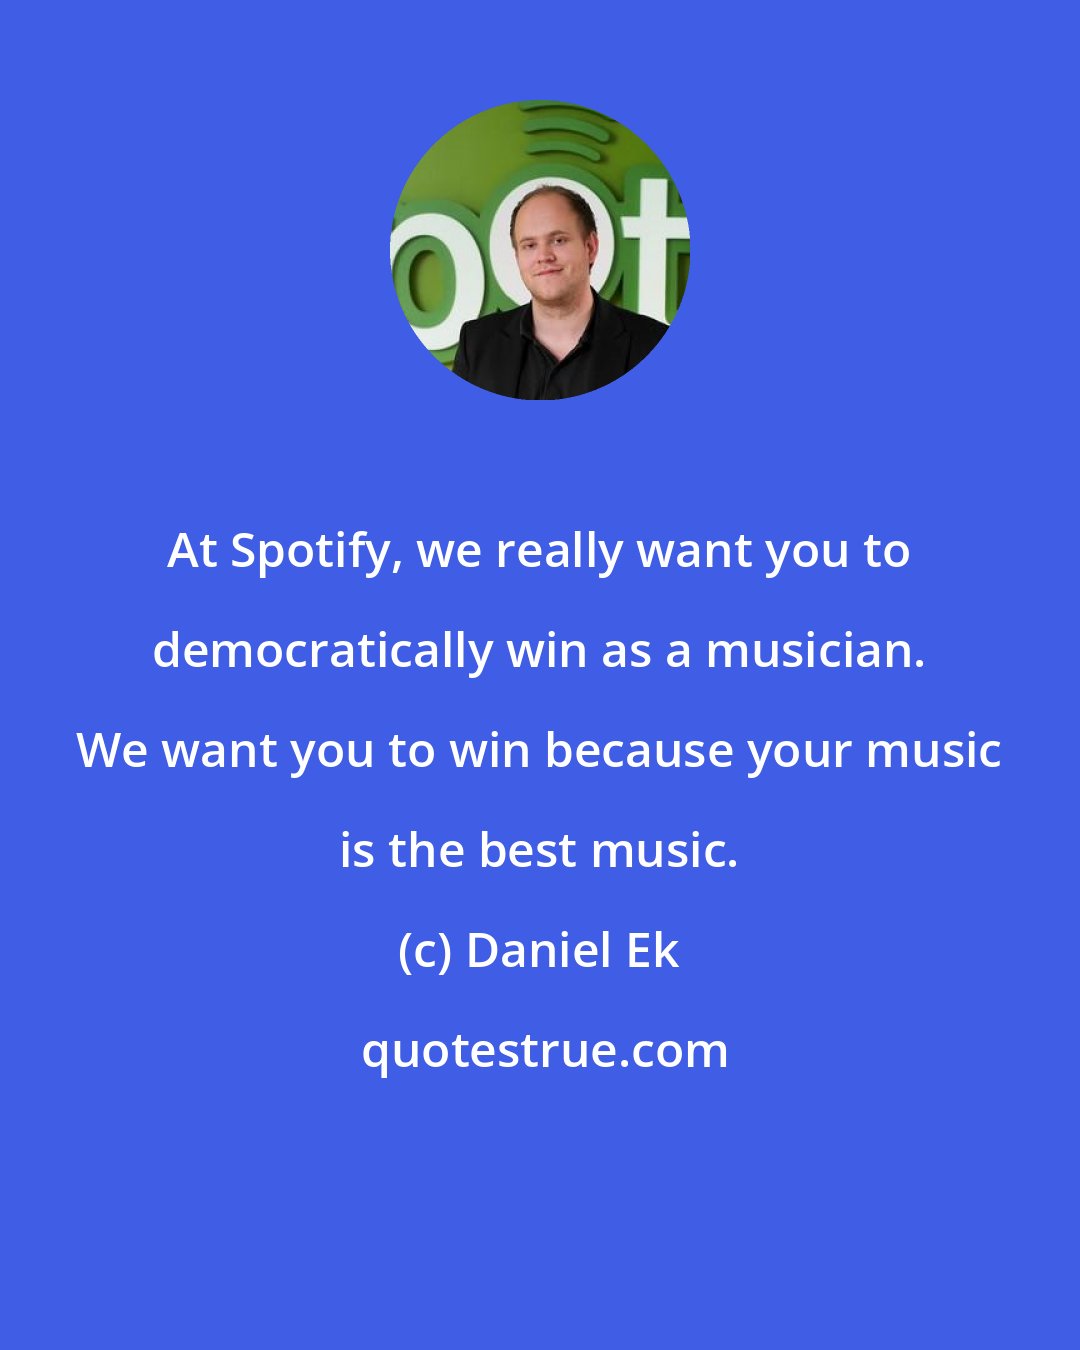 Daniel Ek: At Spotify, we really want you to democratically win as a musician. We want you to win because your music is the best music.